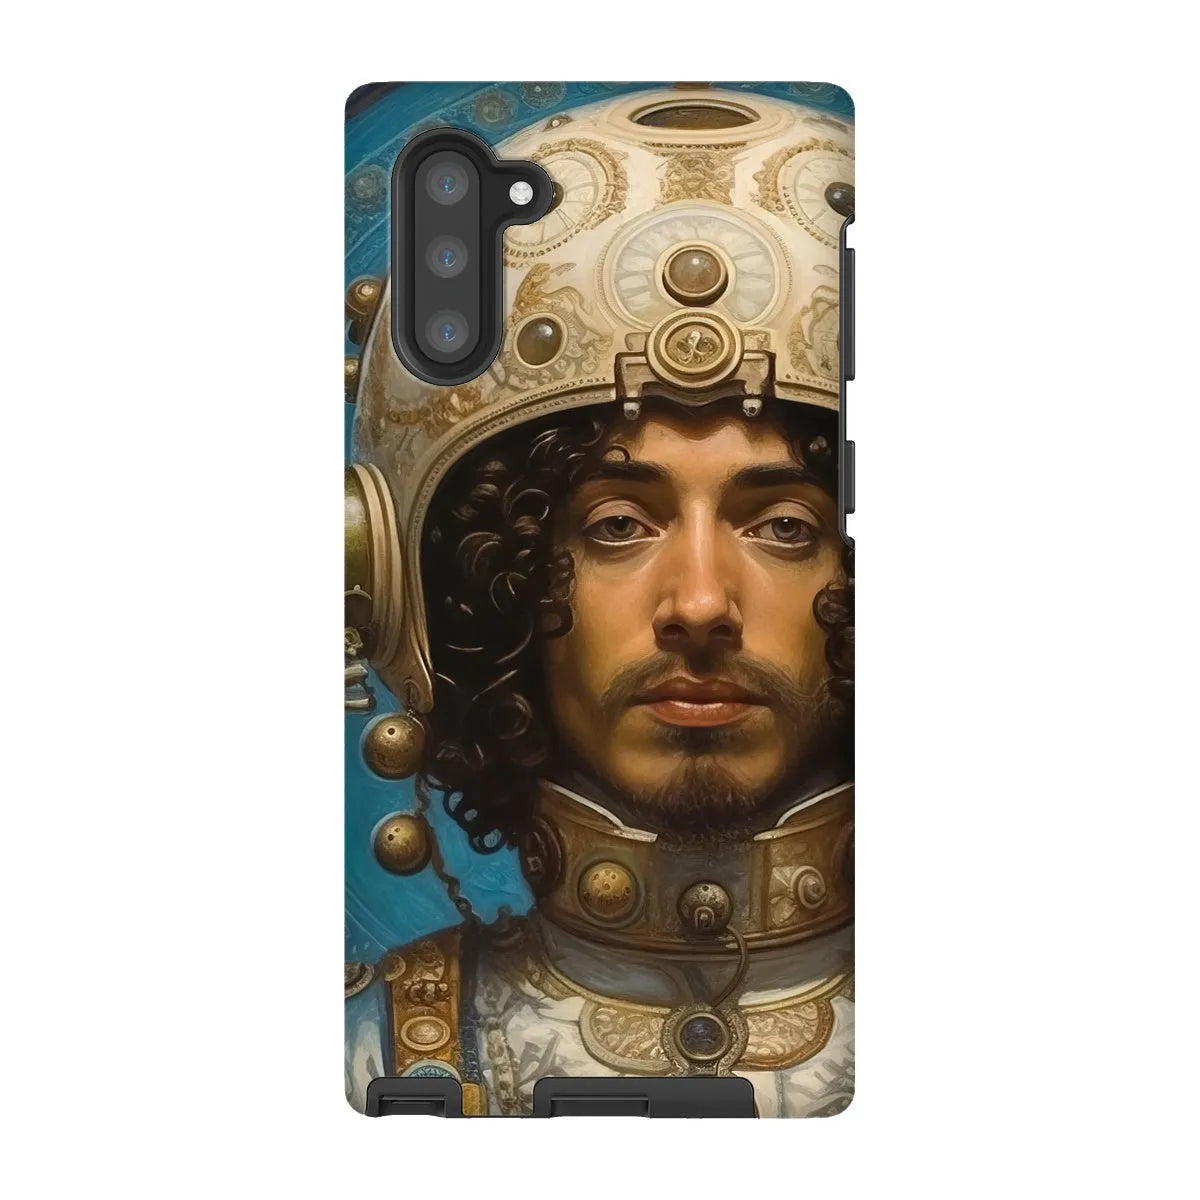 Mehdi The Gay Astronaut - Lgbtq Art Phone Case - Samsung Galaxy Note 10 / Matte - Mobile Phone Cases - Aesthetic Art